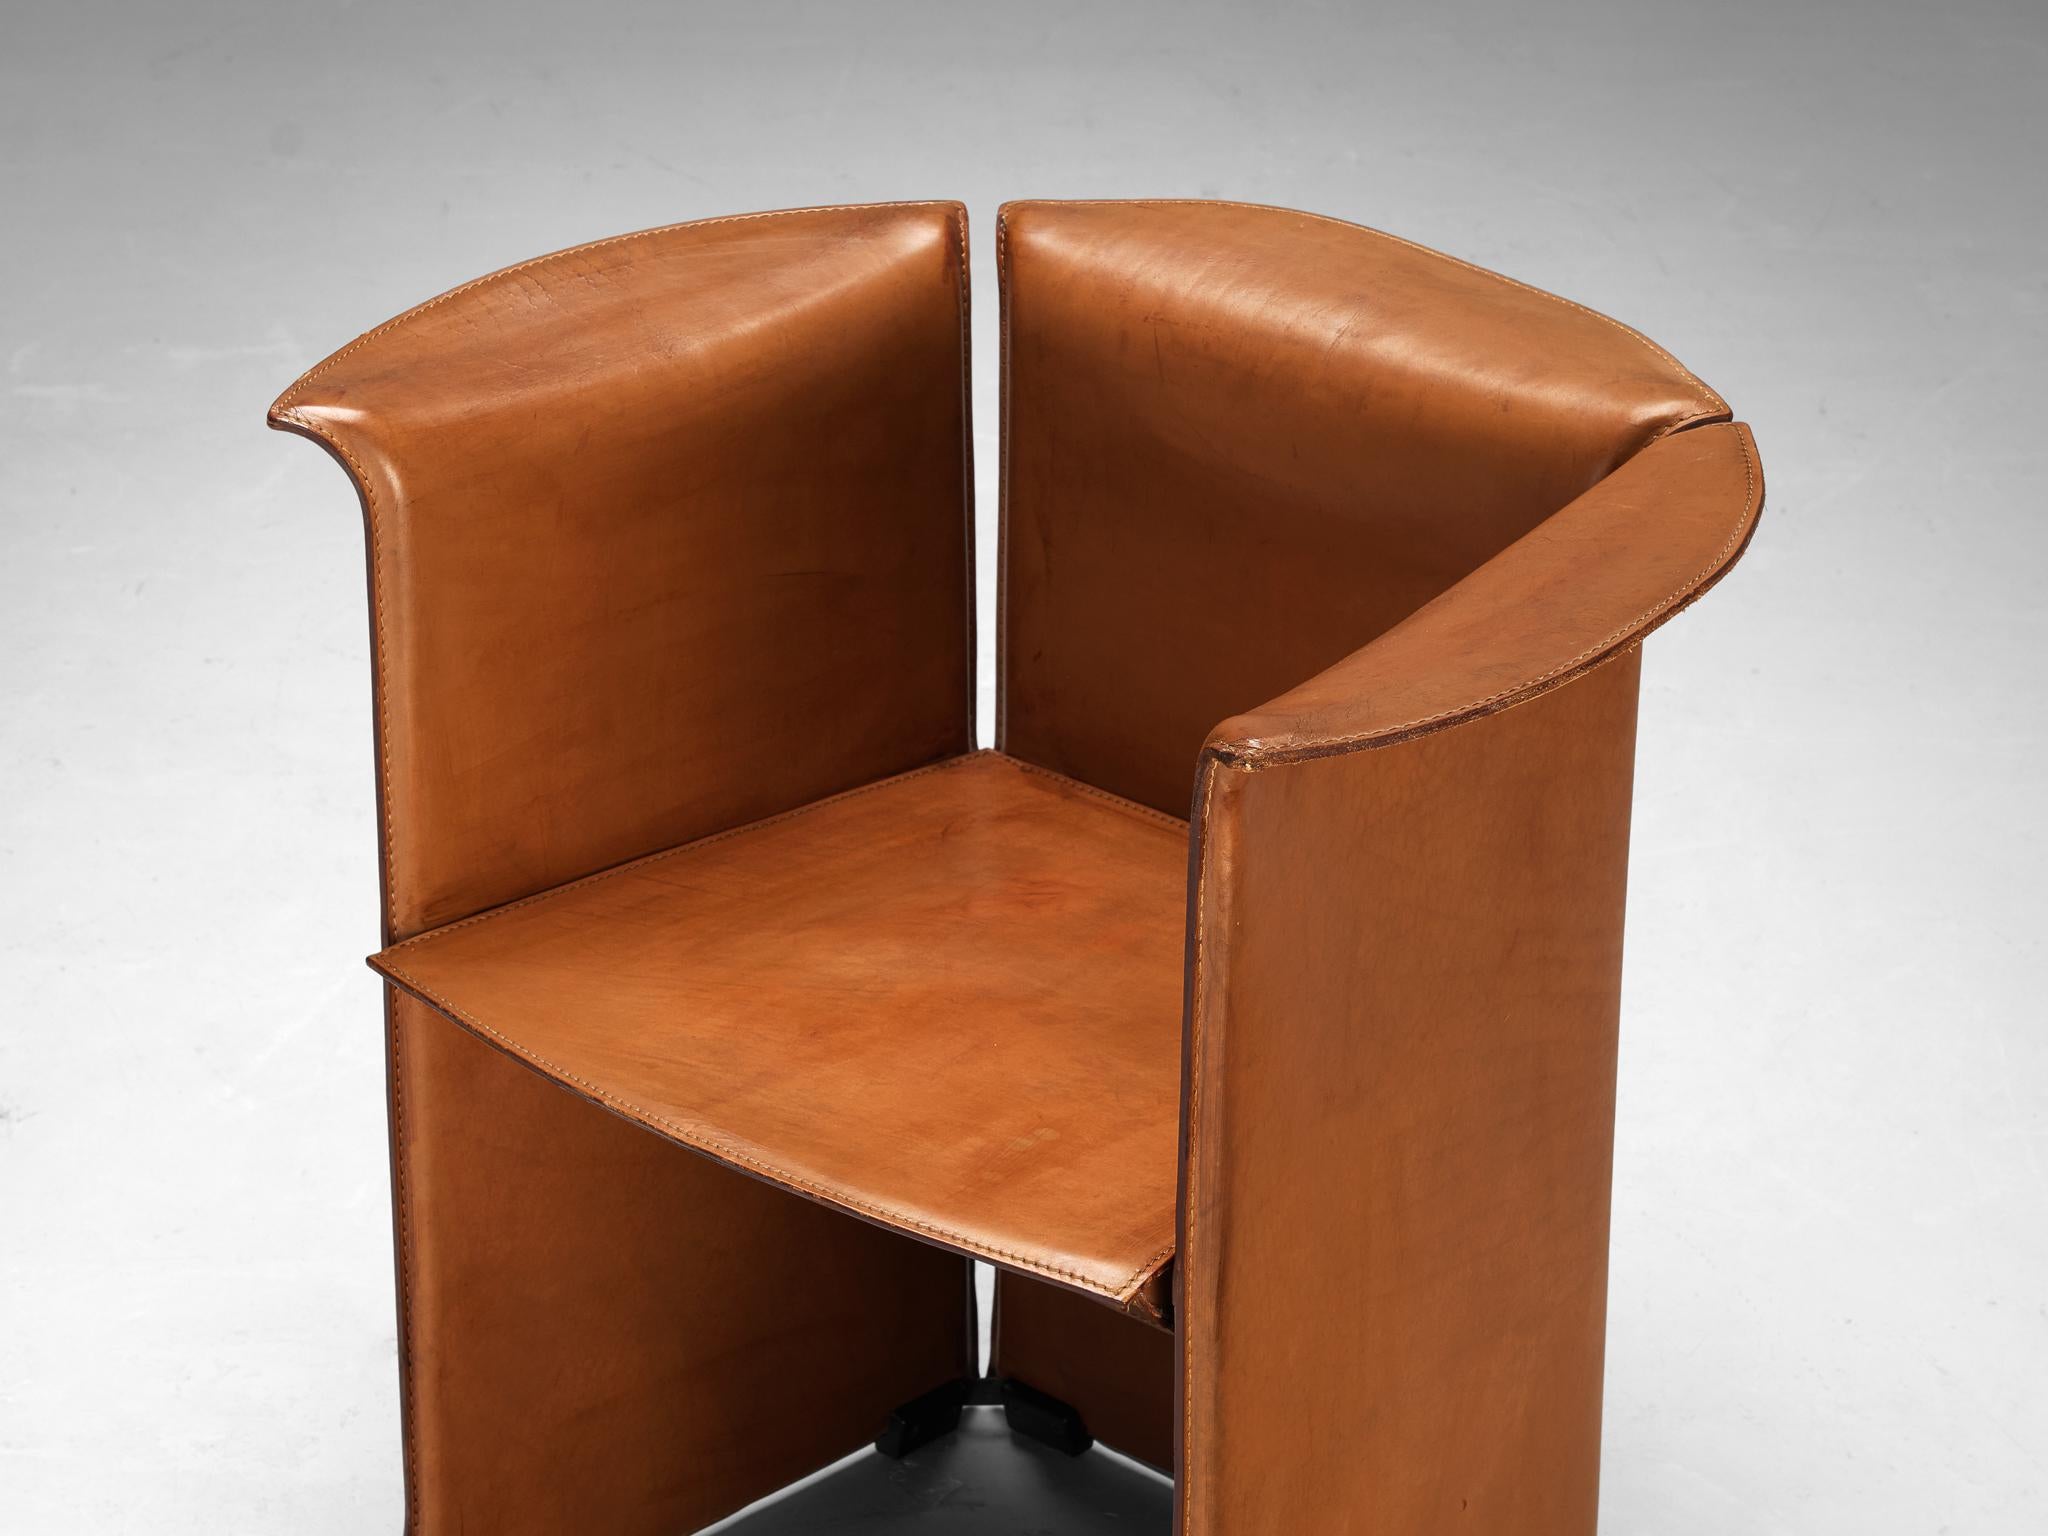 Italian Isao Hosoe for Cassina 'Artù' Armchairs in Cognac Brown Leather  For Sale